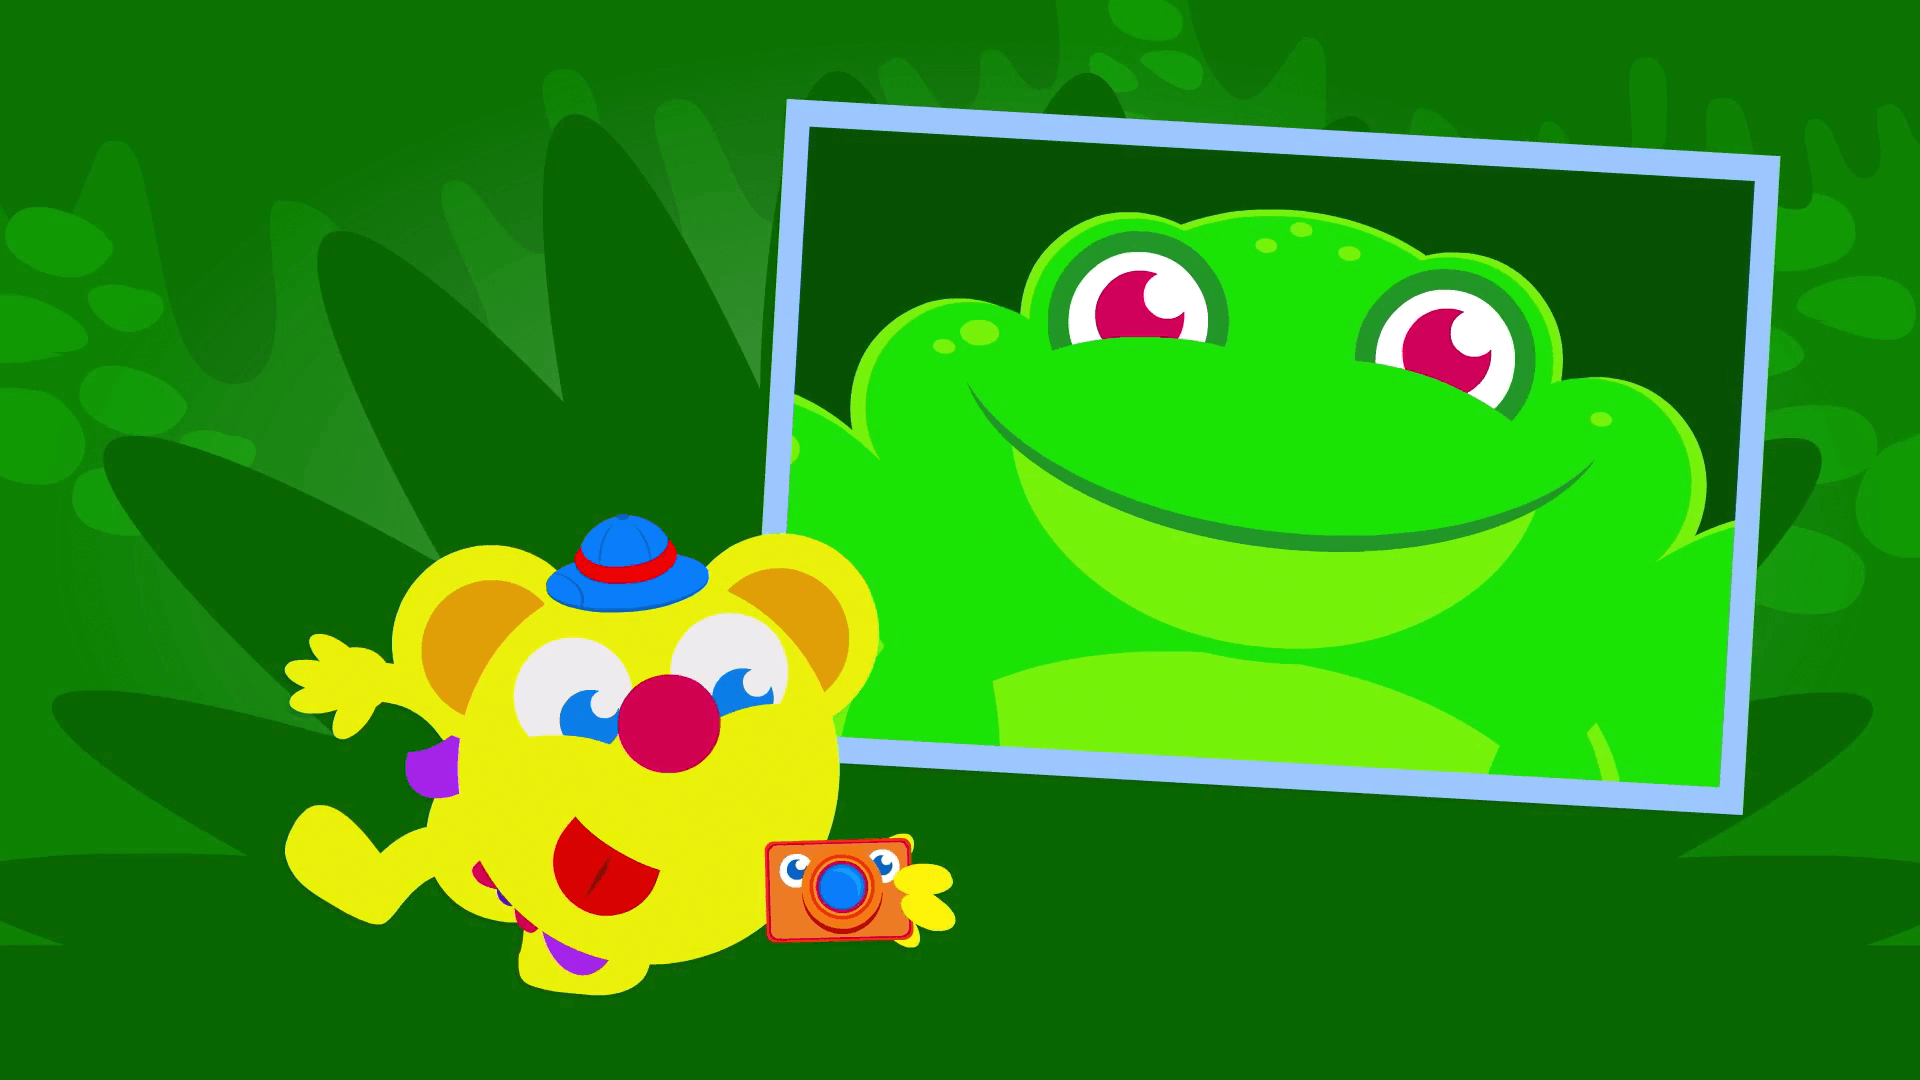 freddy takes photo of frog episode of the kneebouncers show on babyfirsttv